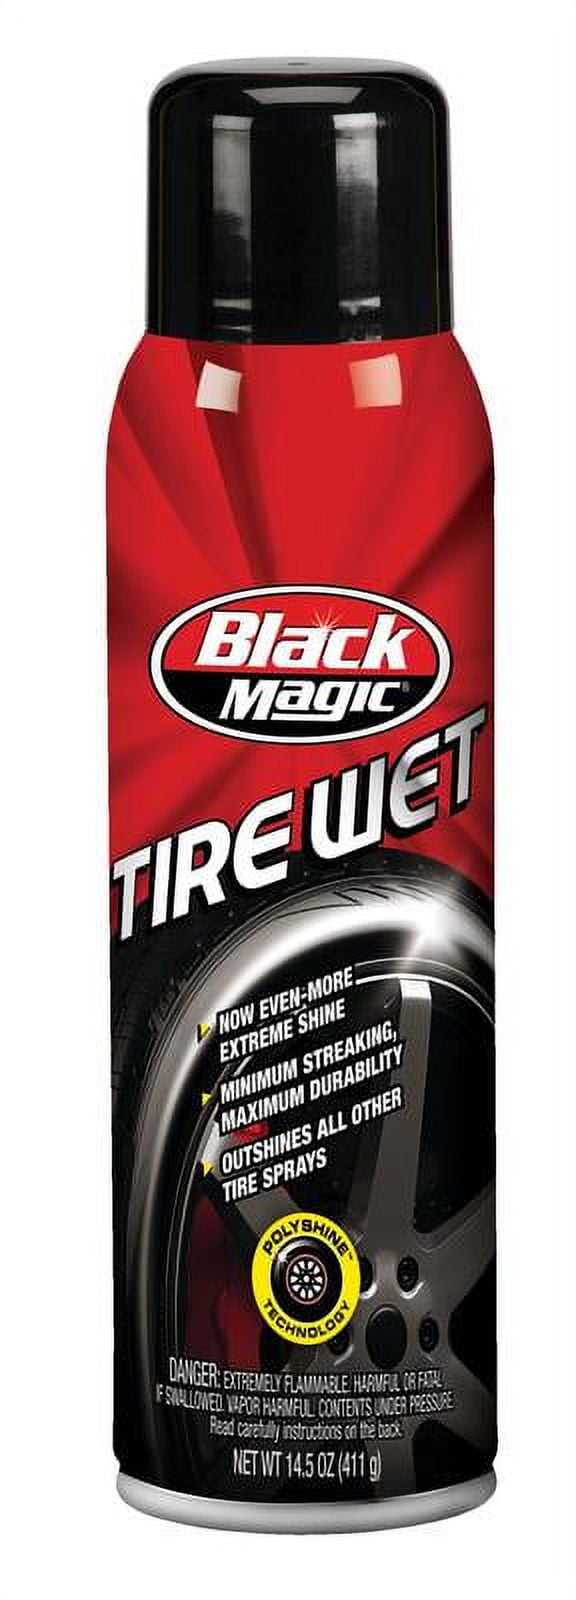 The name to know is Black Magic: Give your tires that high gloss